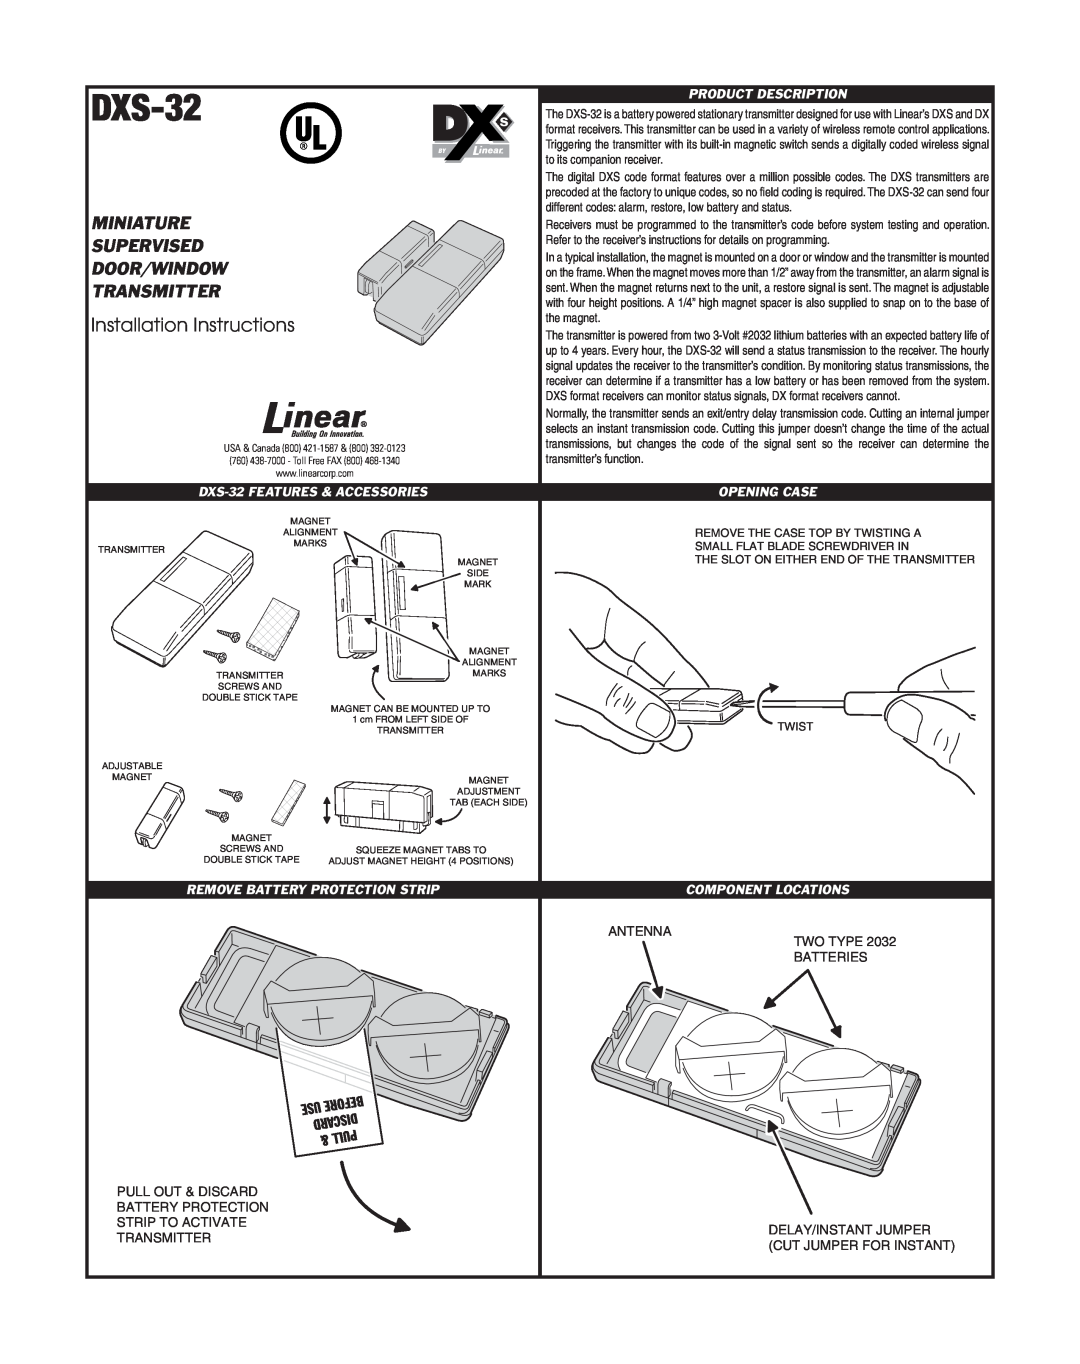 Linear installation instructions DXS-32FEATURES & ACCESSORIES, Remove Battery Protection Strip, Product Description 